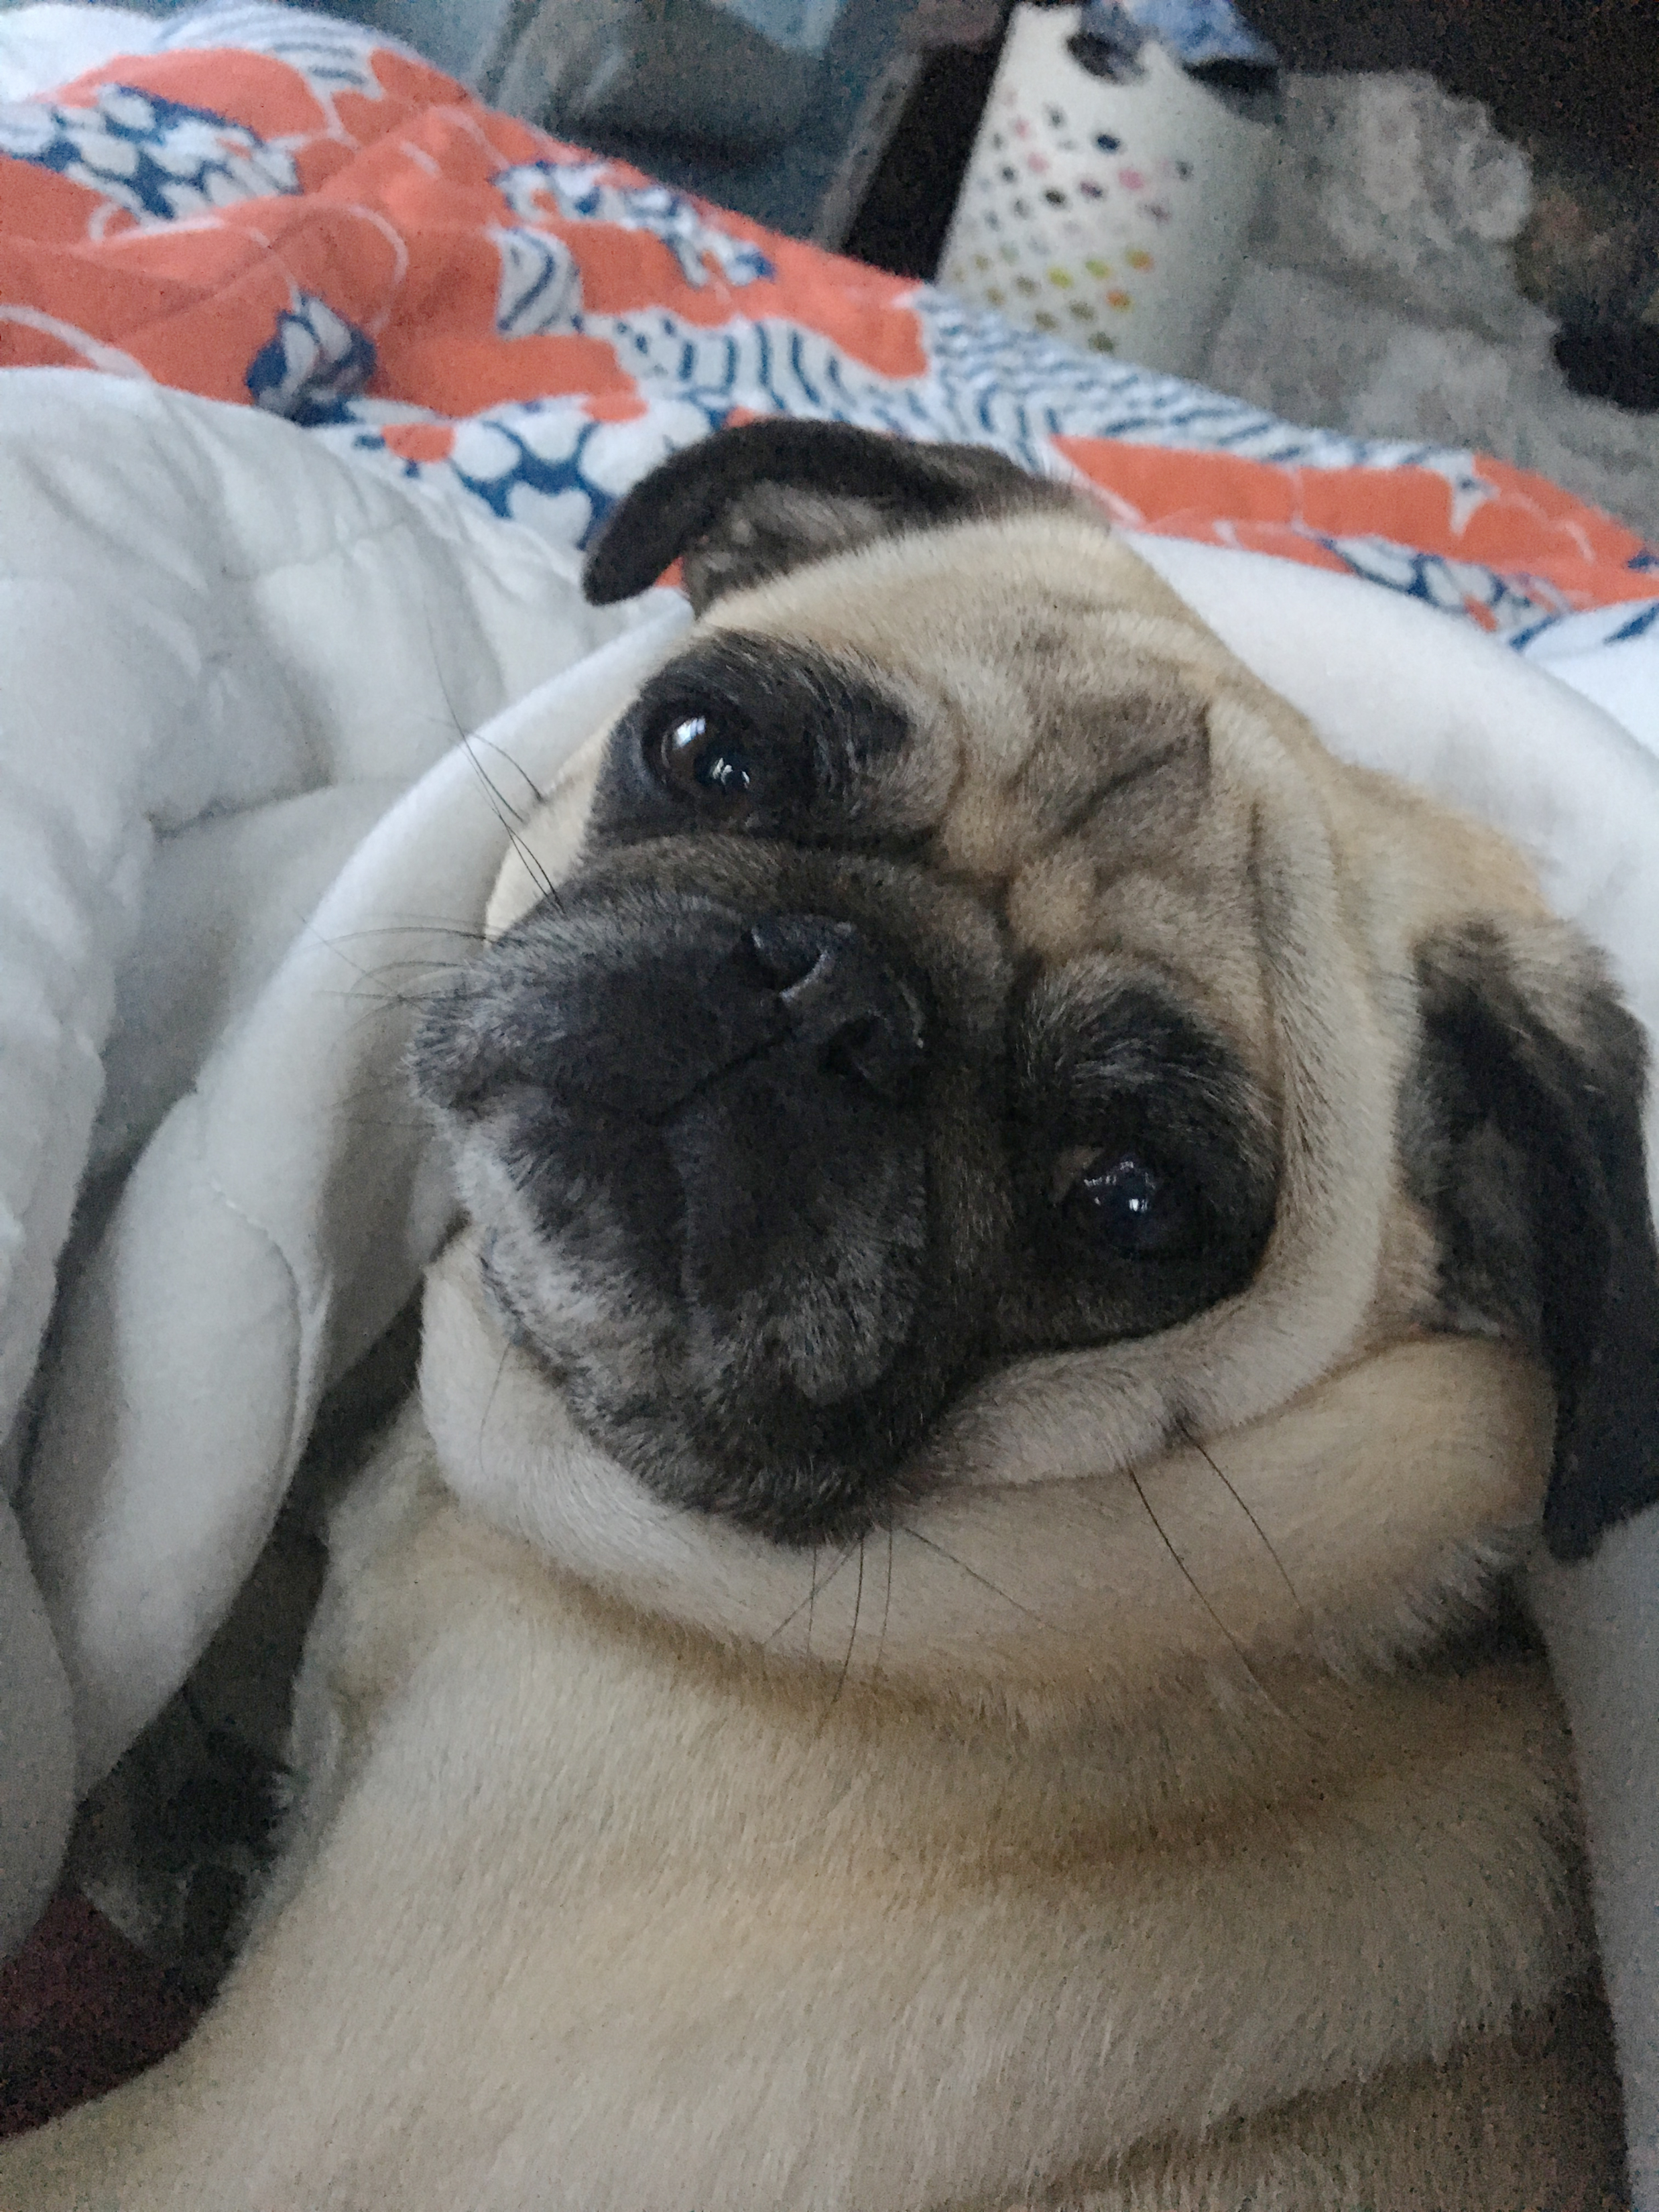 Is it Healthy for me to Sleep with my Pug?